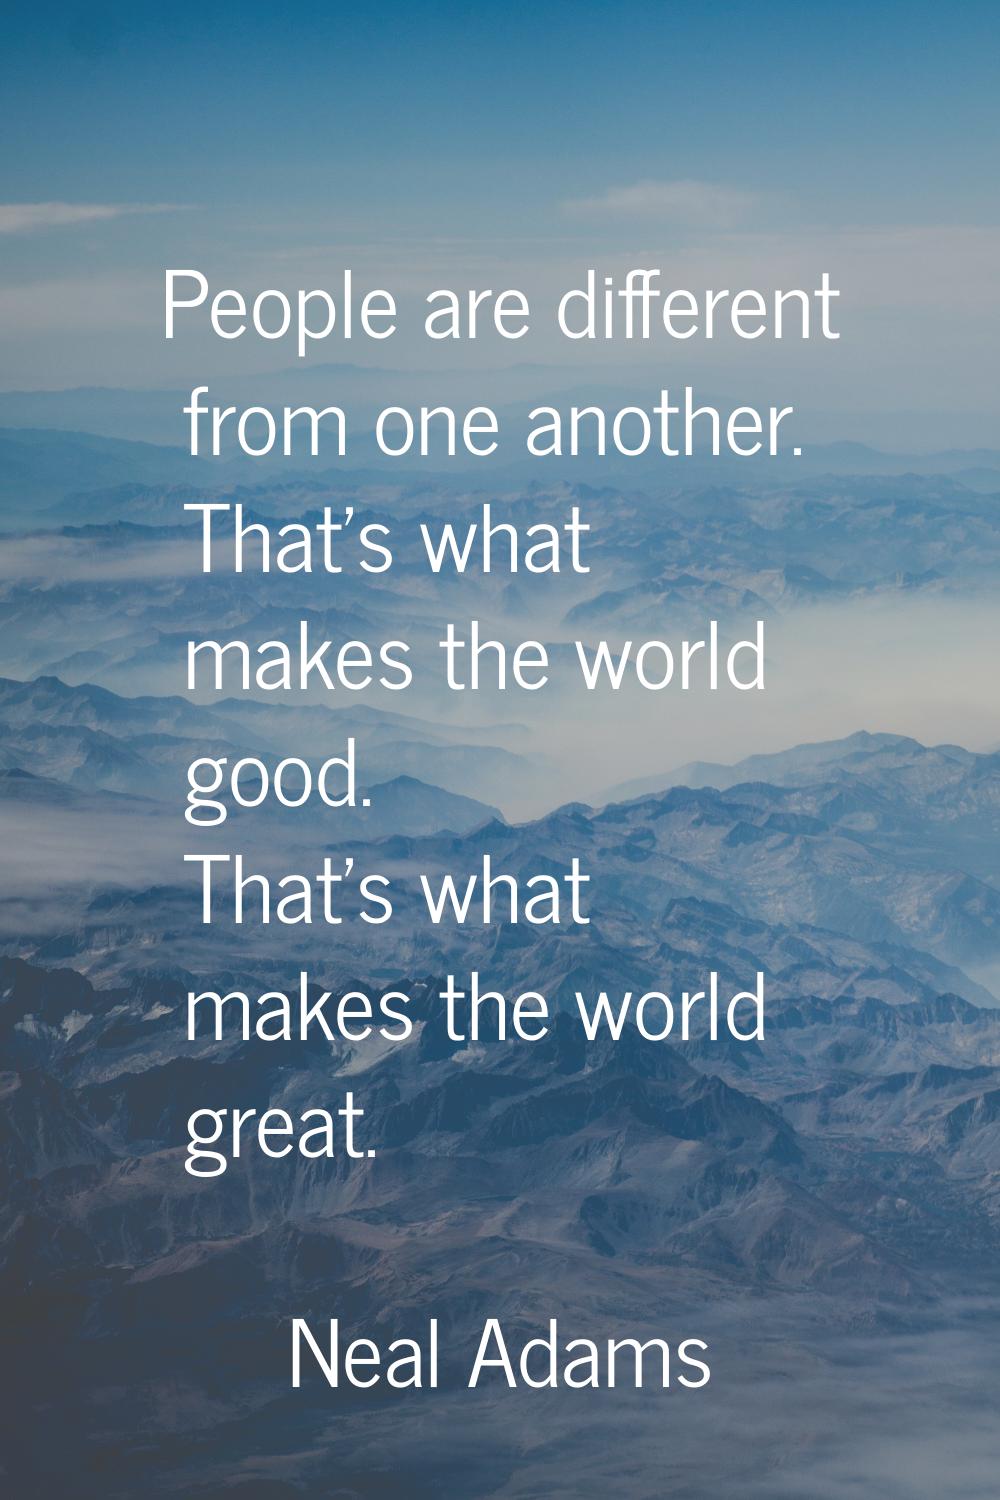 People are different from one another. That's what makes the world good. That's what makes the worl